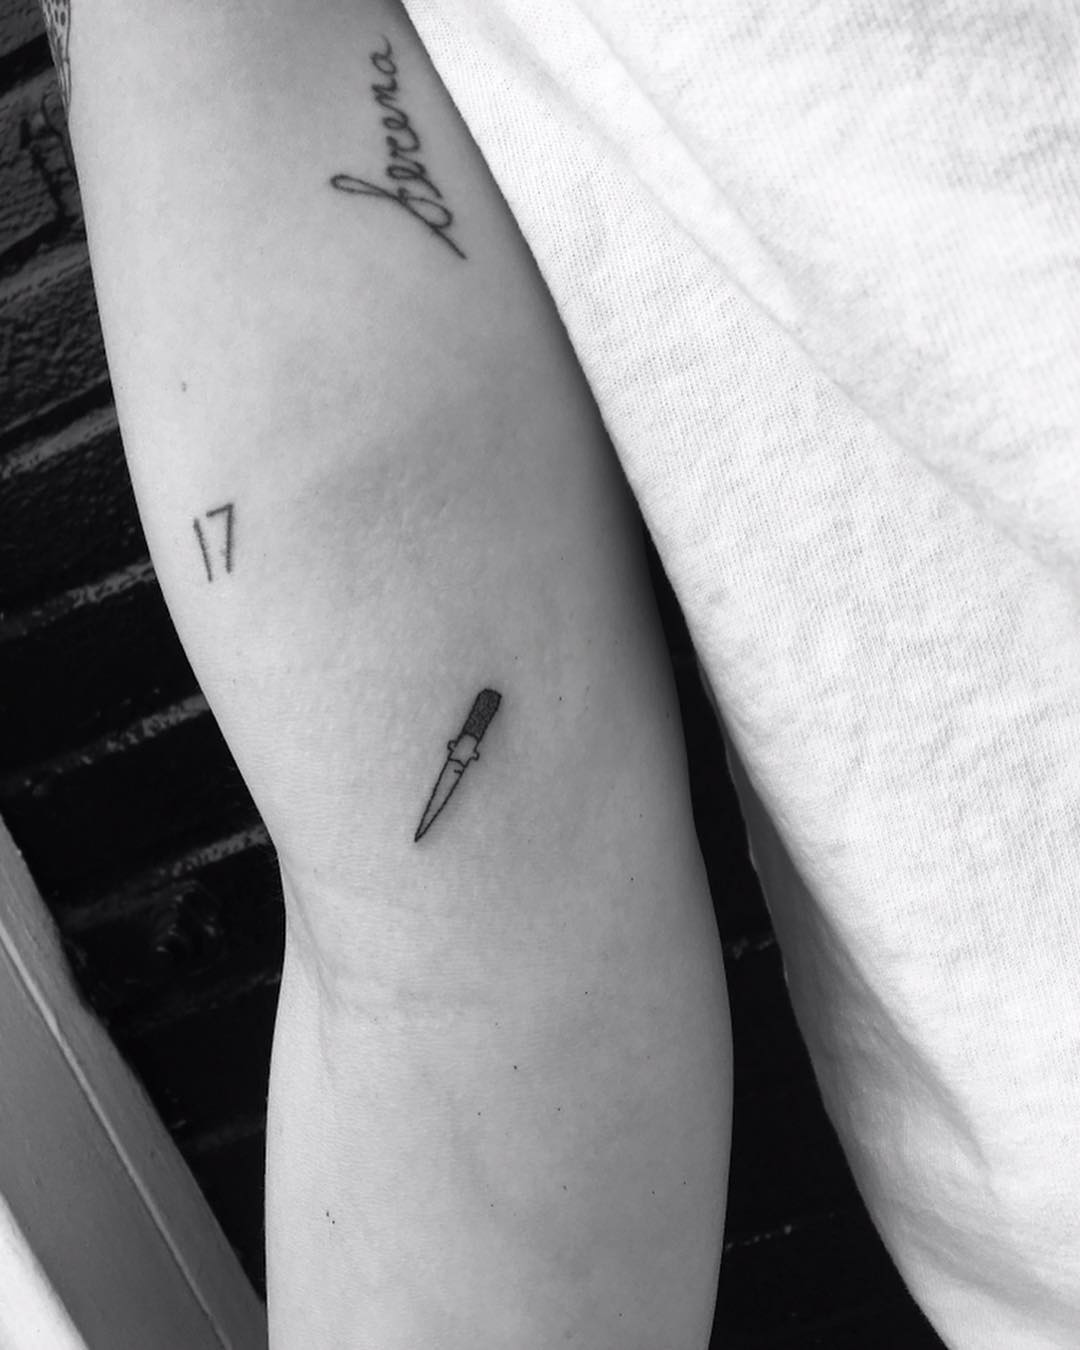 69 Striking Dagger Tattoos With Meaning - Our Mindful Life